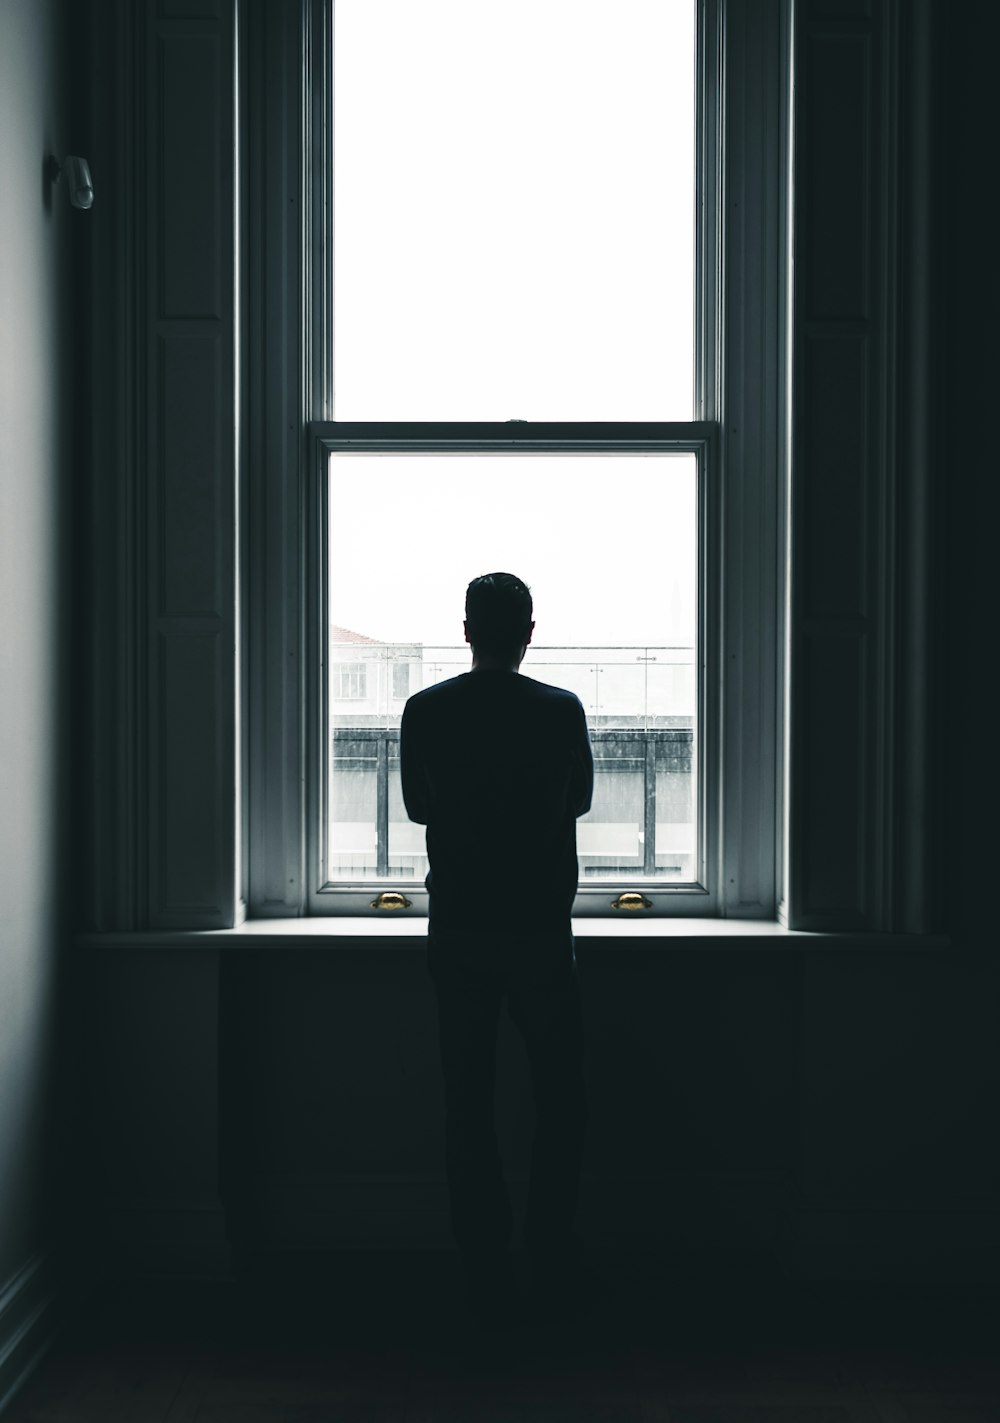 Man Window Pictures  Download Free Images on Unsplash